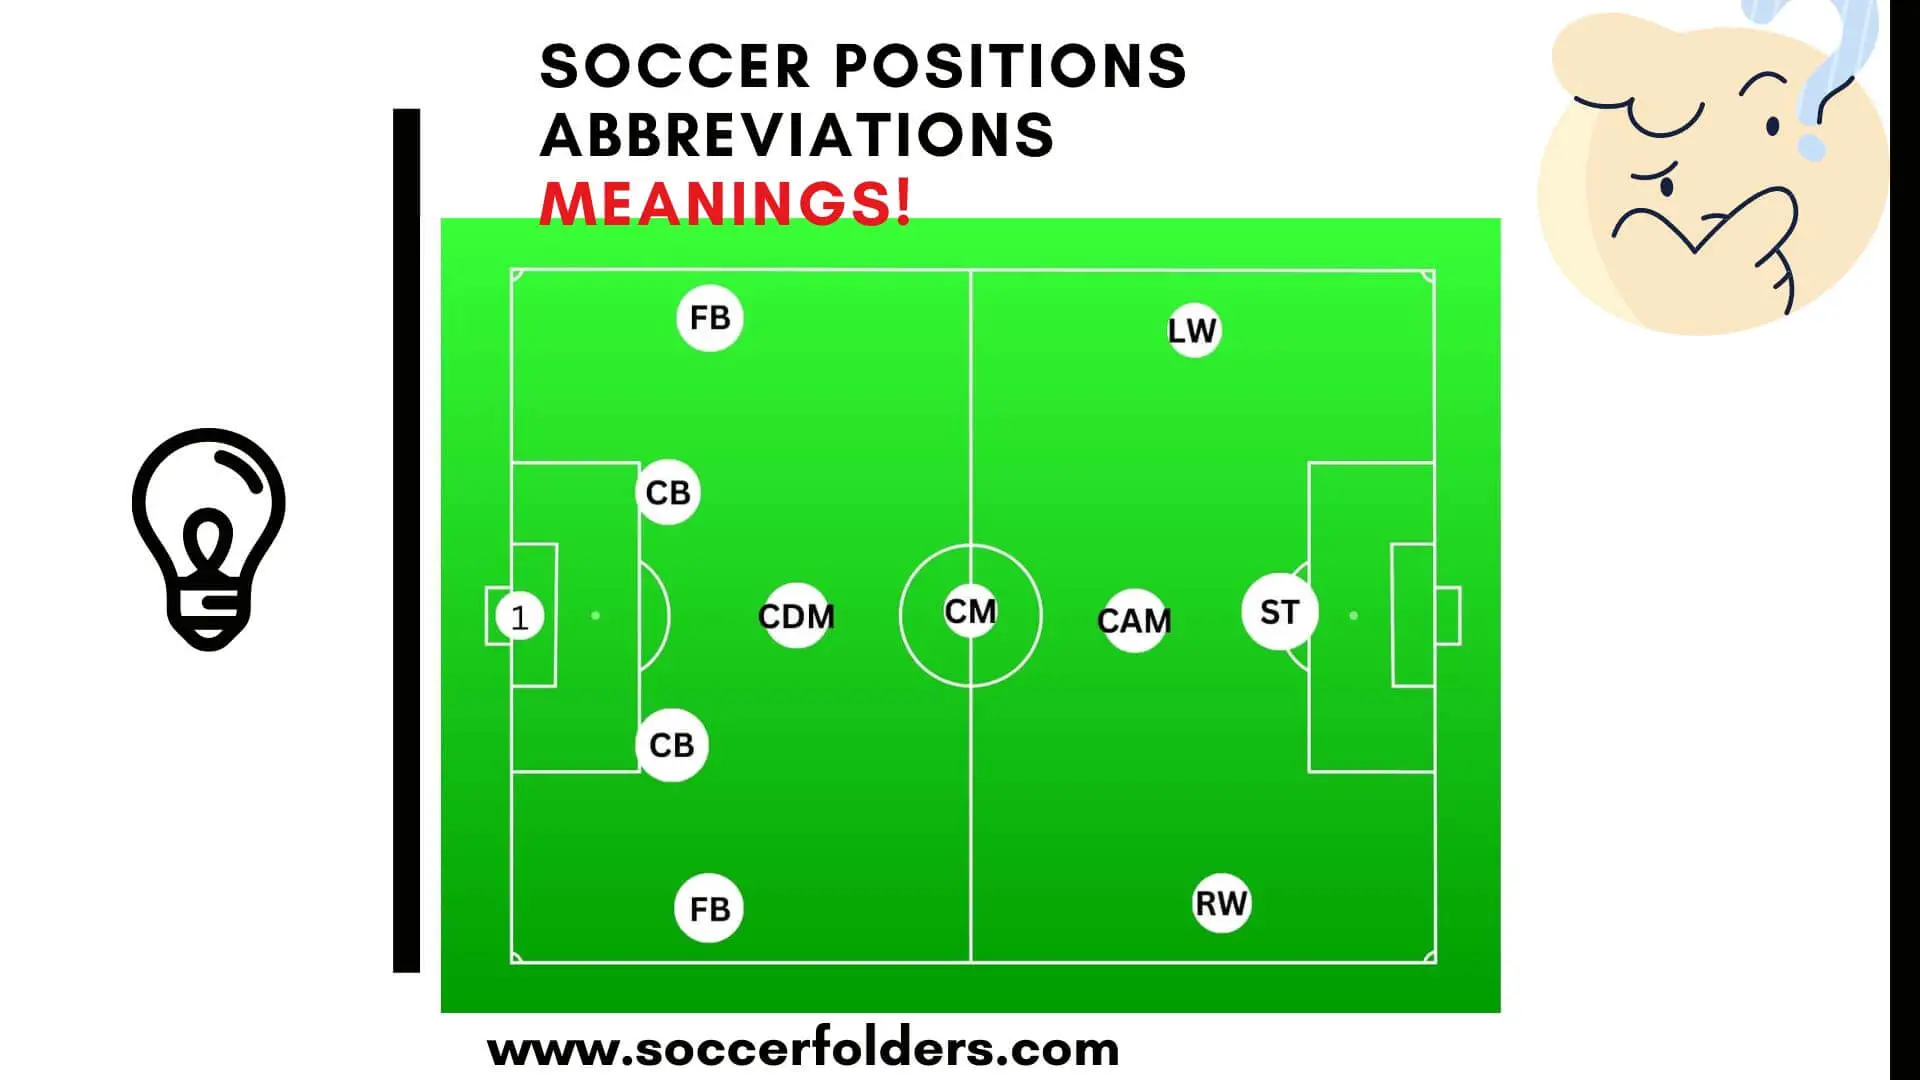 Soccer positions abbreviations - Featured image